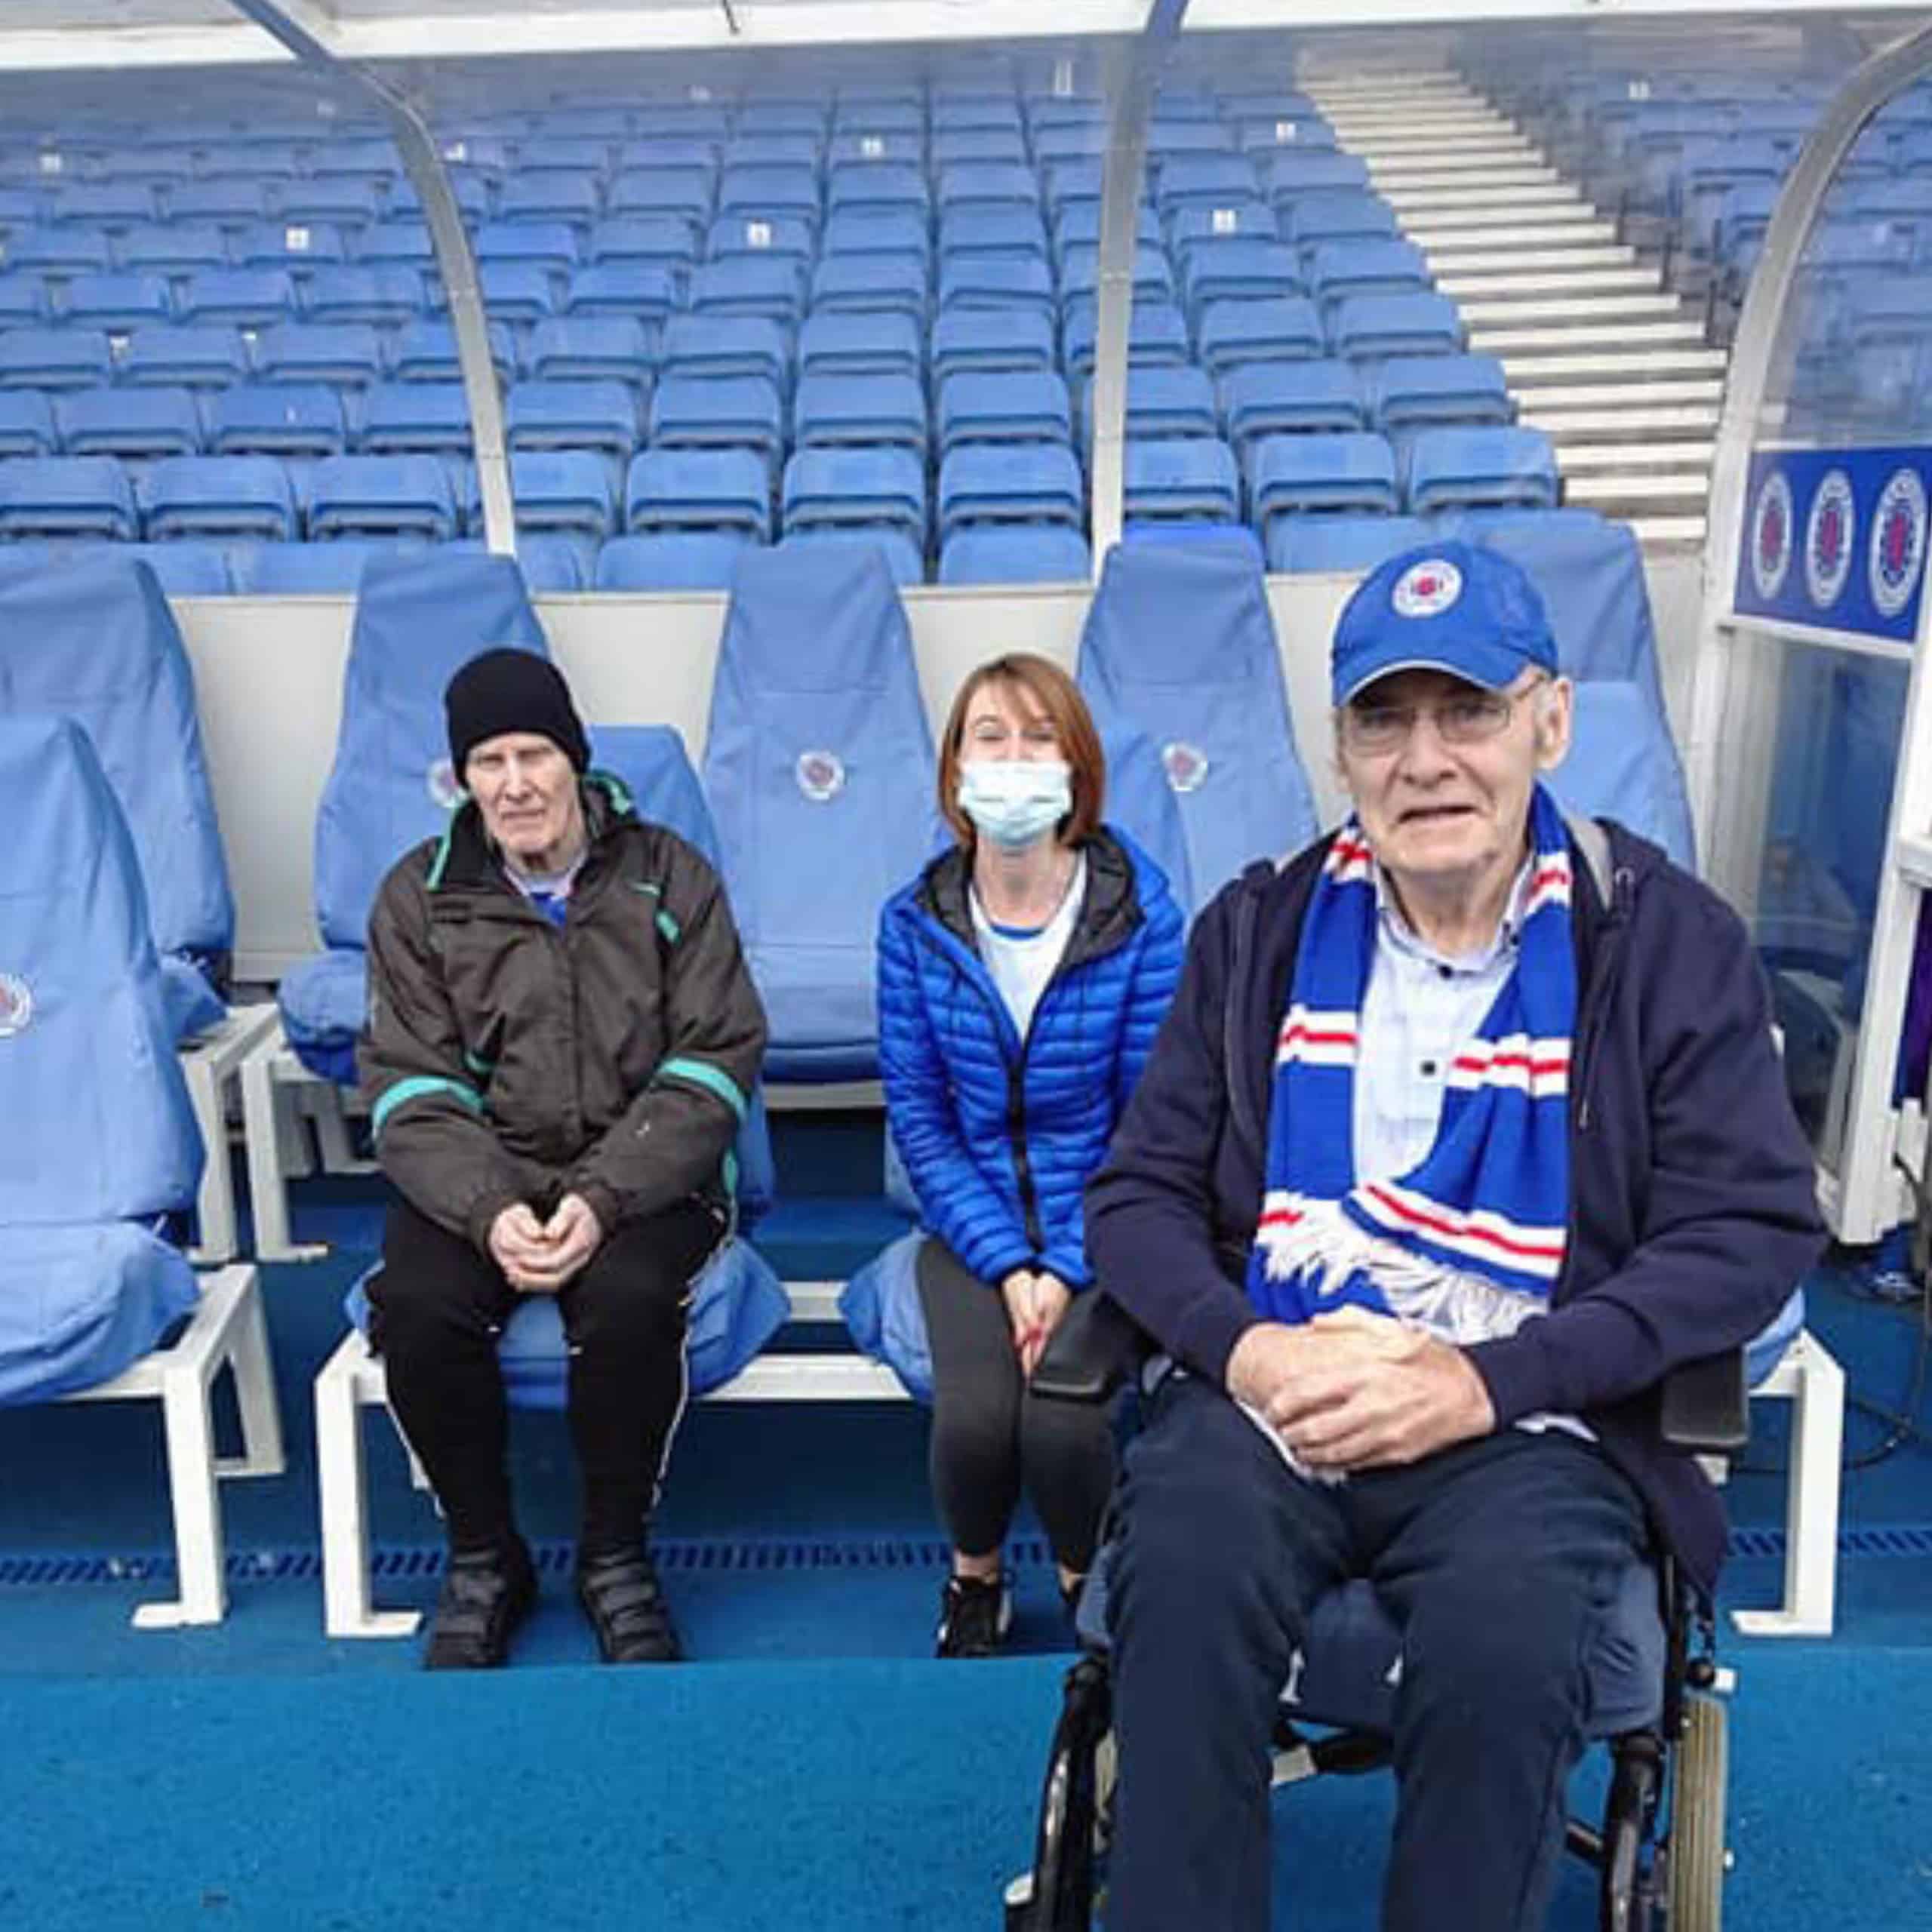 East Renfrewshire Care Home resident Gordon enjoys a day out from his home at Eastwood Court to visit his beloved Ibrox Football Stadium.